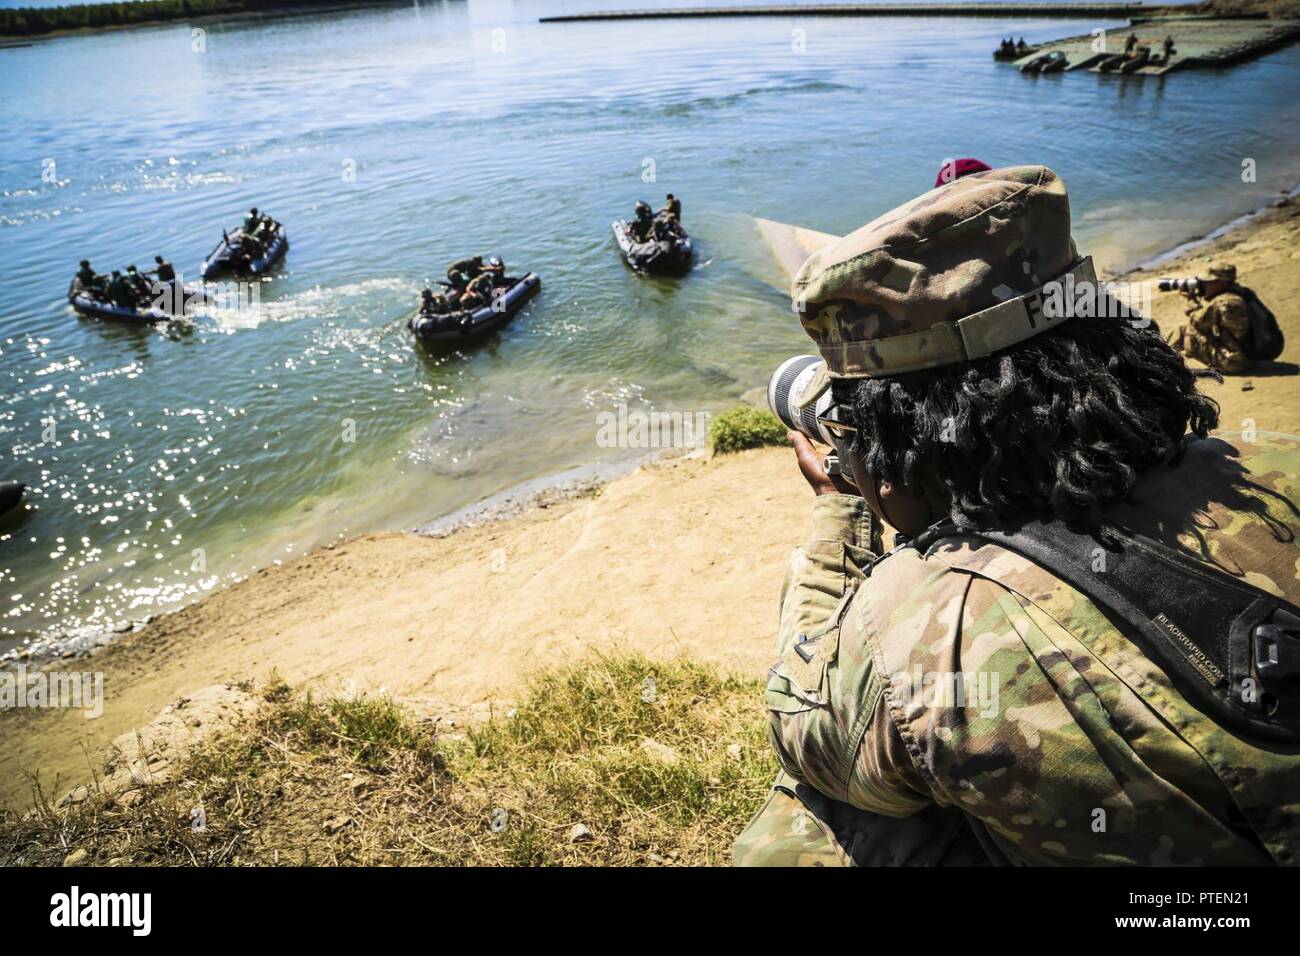 U.S. Army Pfc. Shekinah Frye, photographer assigned to 55th Signal Company (Combat Camera), documents a river crossing exercise during Saber Guardian 17 over the Danube River, Bordusani, Romania, July 15, 2017. Saber Guardian is a U.S. Army Europe-led multinational exercise that spans across Bulgaria, Hungary and Romania with more than 25,000 service members from 22 allied and partner nations. Stock Photo